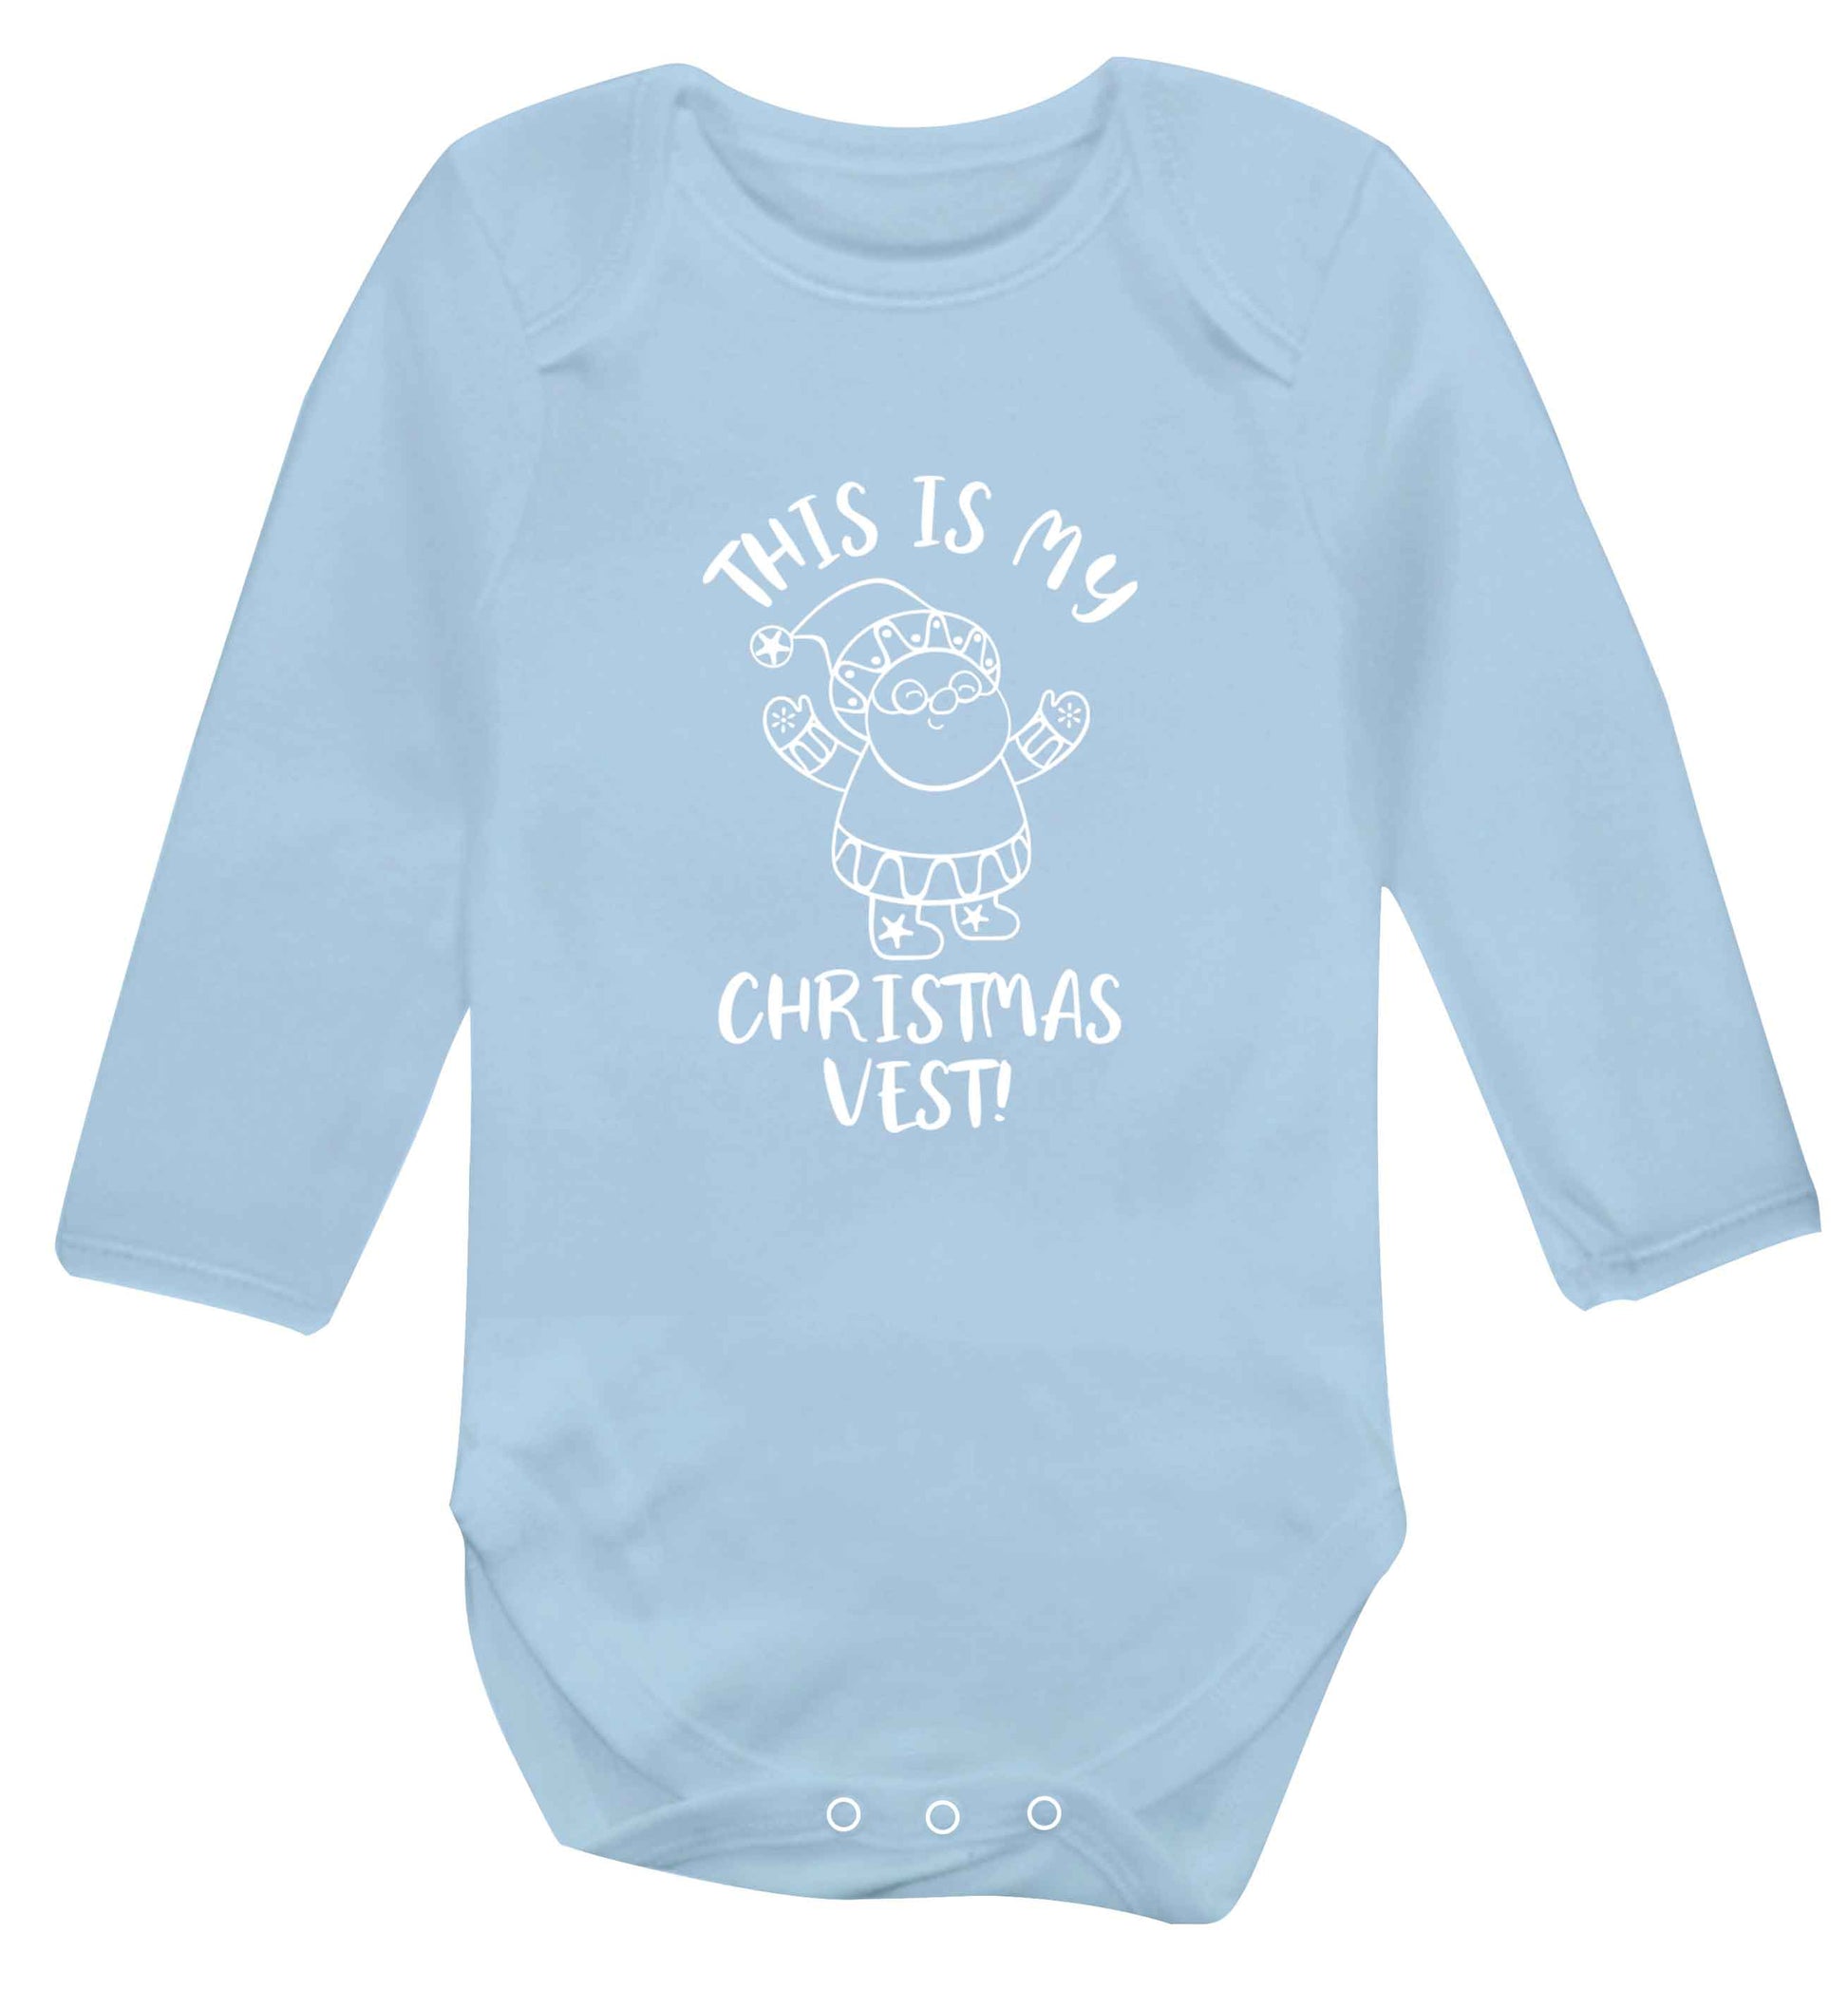 This is my Christmas vest Baby Vest long sleeved pale blue 6-12 months